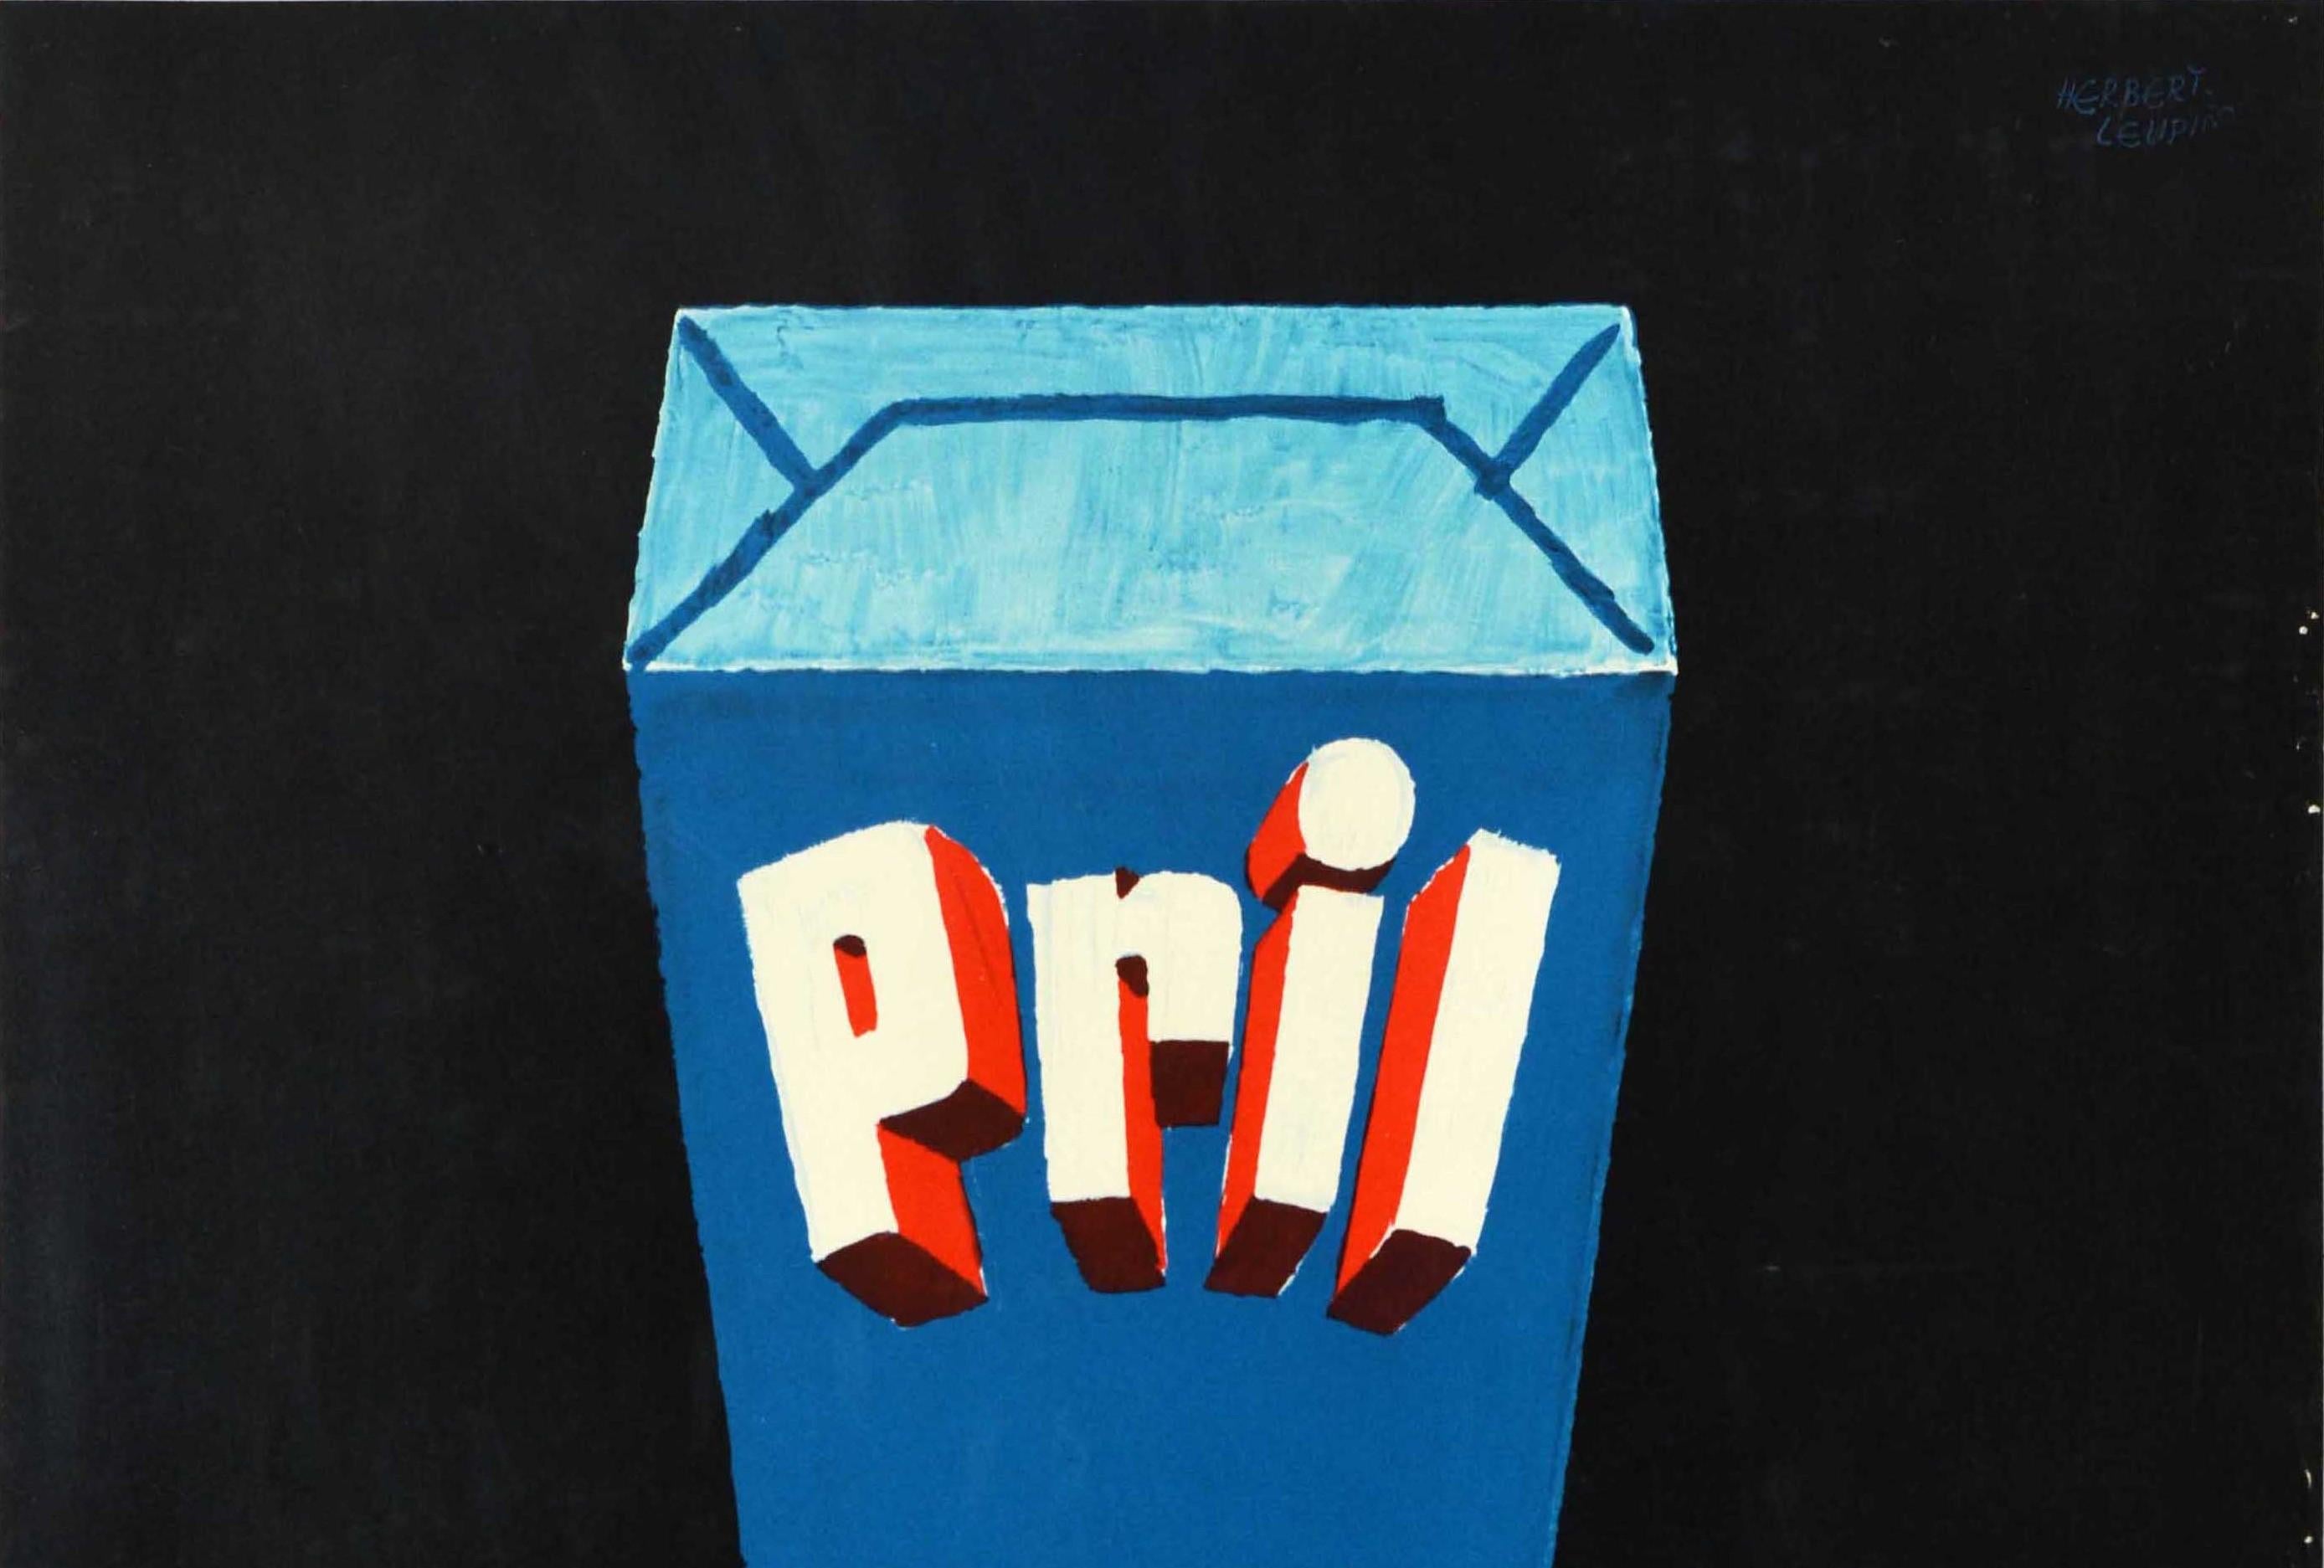 Original vintage advertising poster for Pril entspannt das Wasser (relaxes the water) featuring a great illustration by the Swiss graphic designer Herbert Leupin (1916-1999) depicting a box of Pril as an arm with a finger touching a drop of water